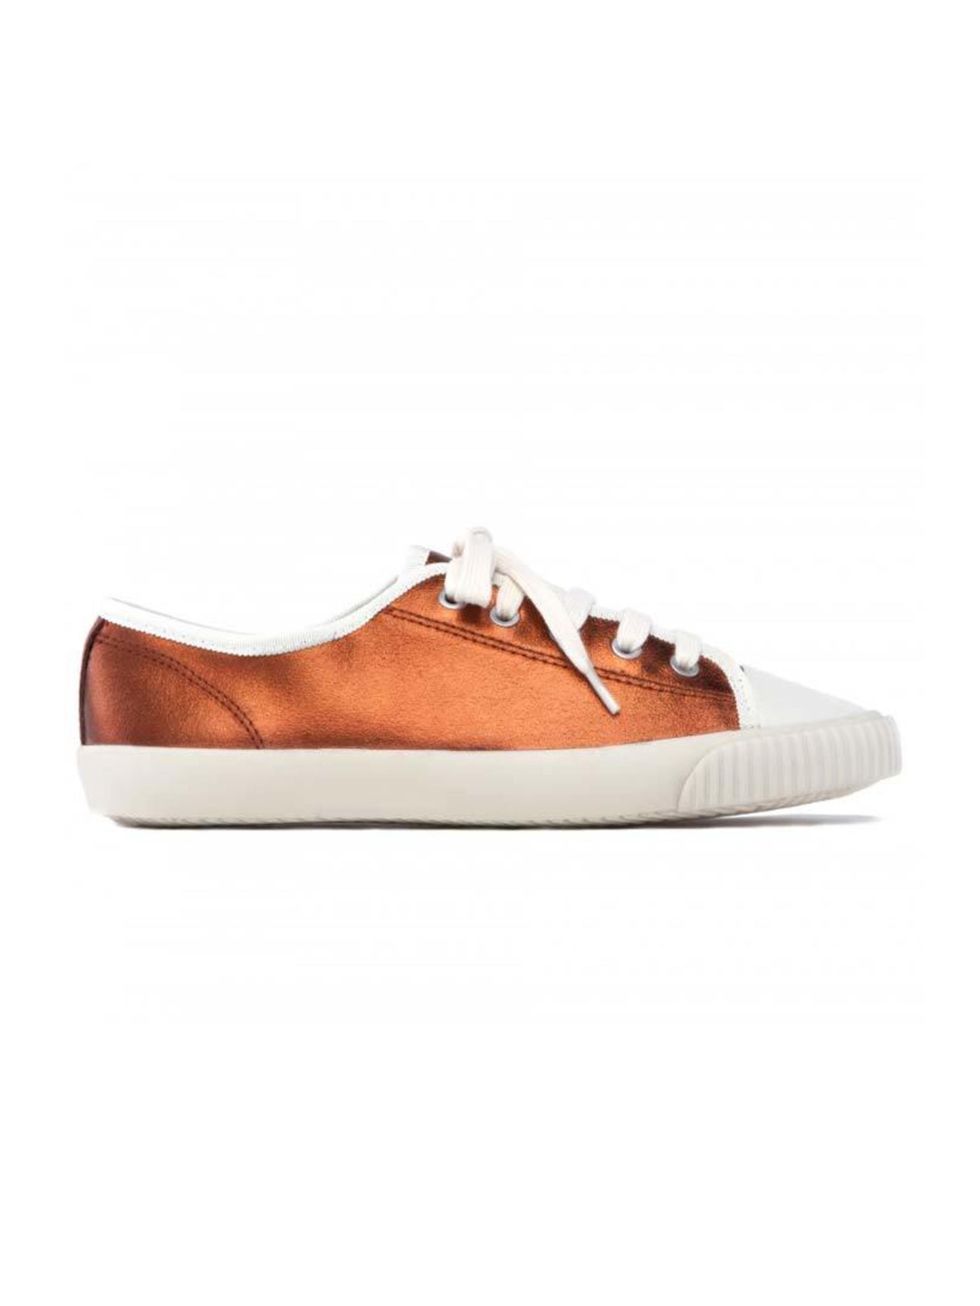 <p>A luxed-up trainer, as loved by Fashion Assistant Molly Haylor. </p>

<p> </p>

<p><a href="http://www.bimbaylola.com/shoponline/product.php?id_product=11487&id_category=682" target="_blank">Bimba y Lola</a> trainers, £90</p>